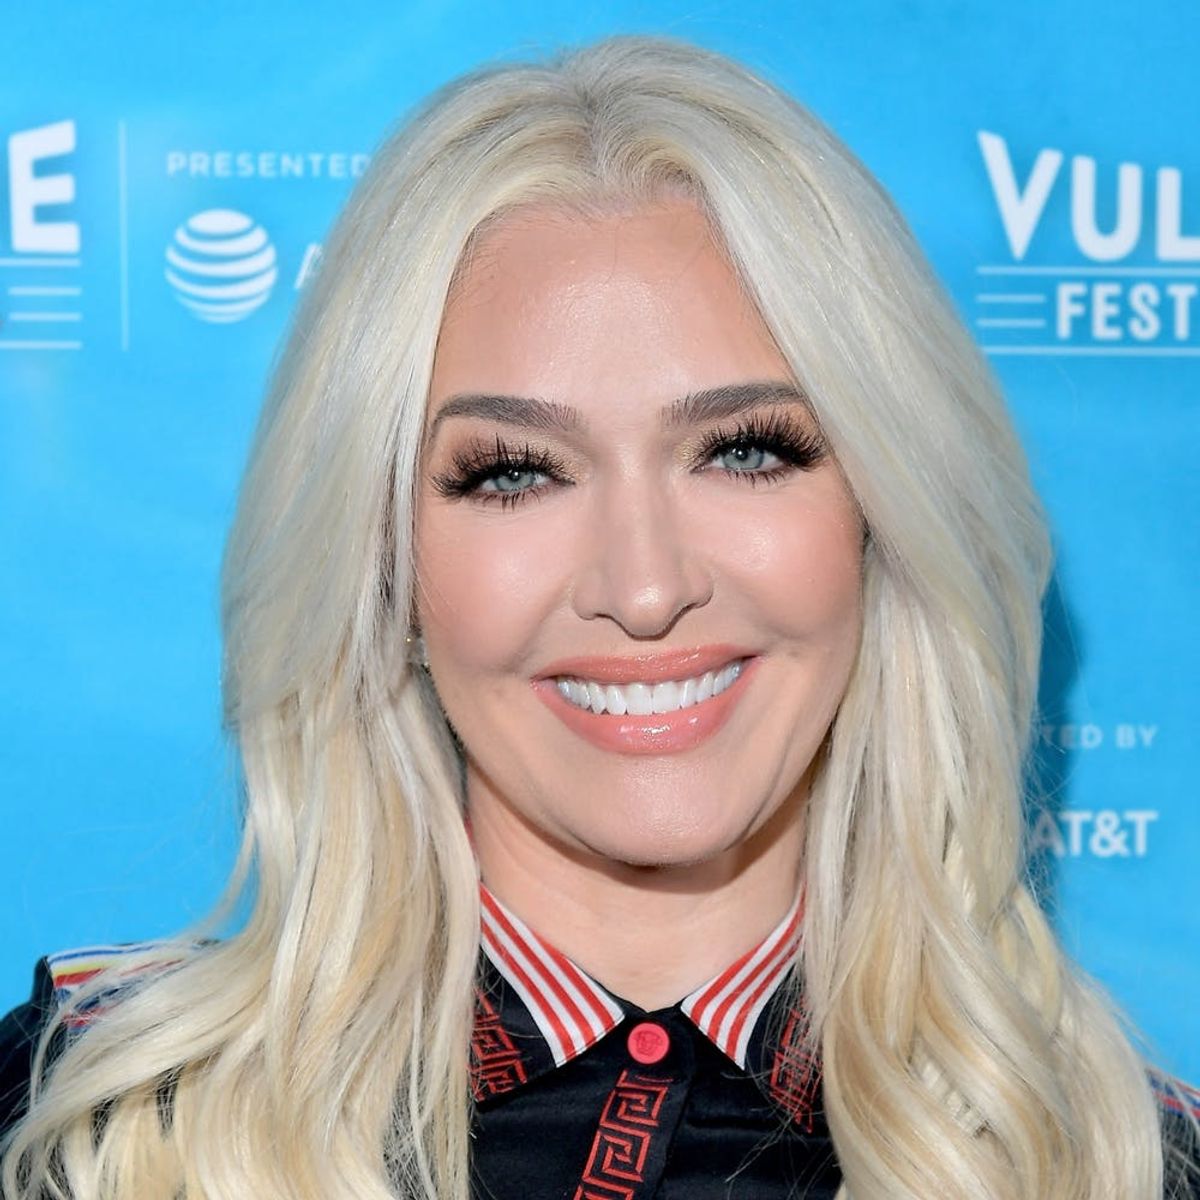 Erika Jayne Spends $40,000 Each Month on Her Glam Look